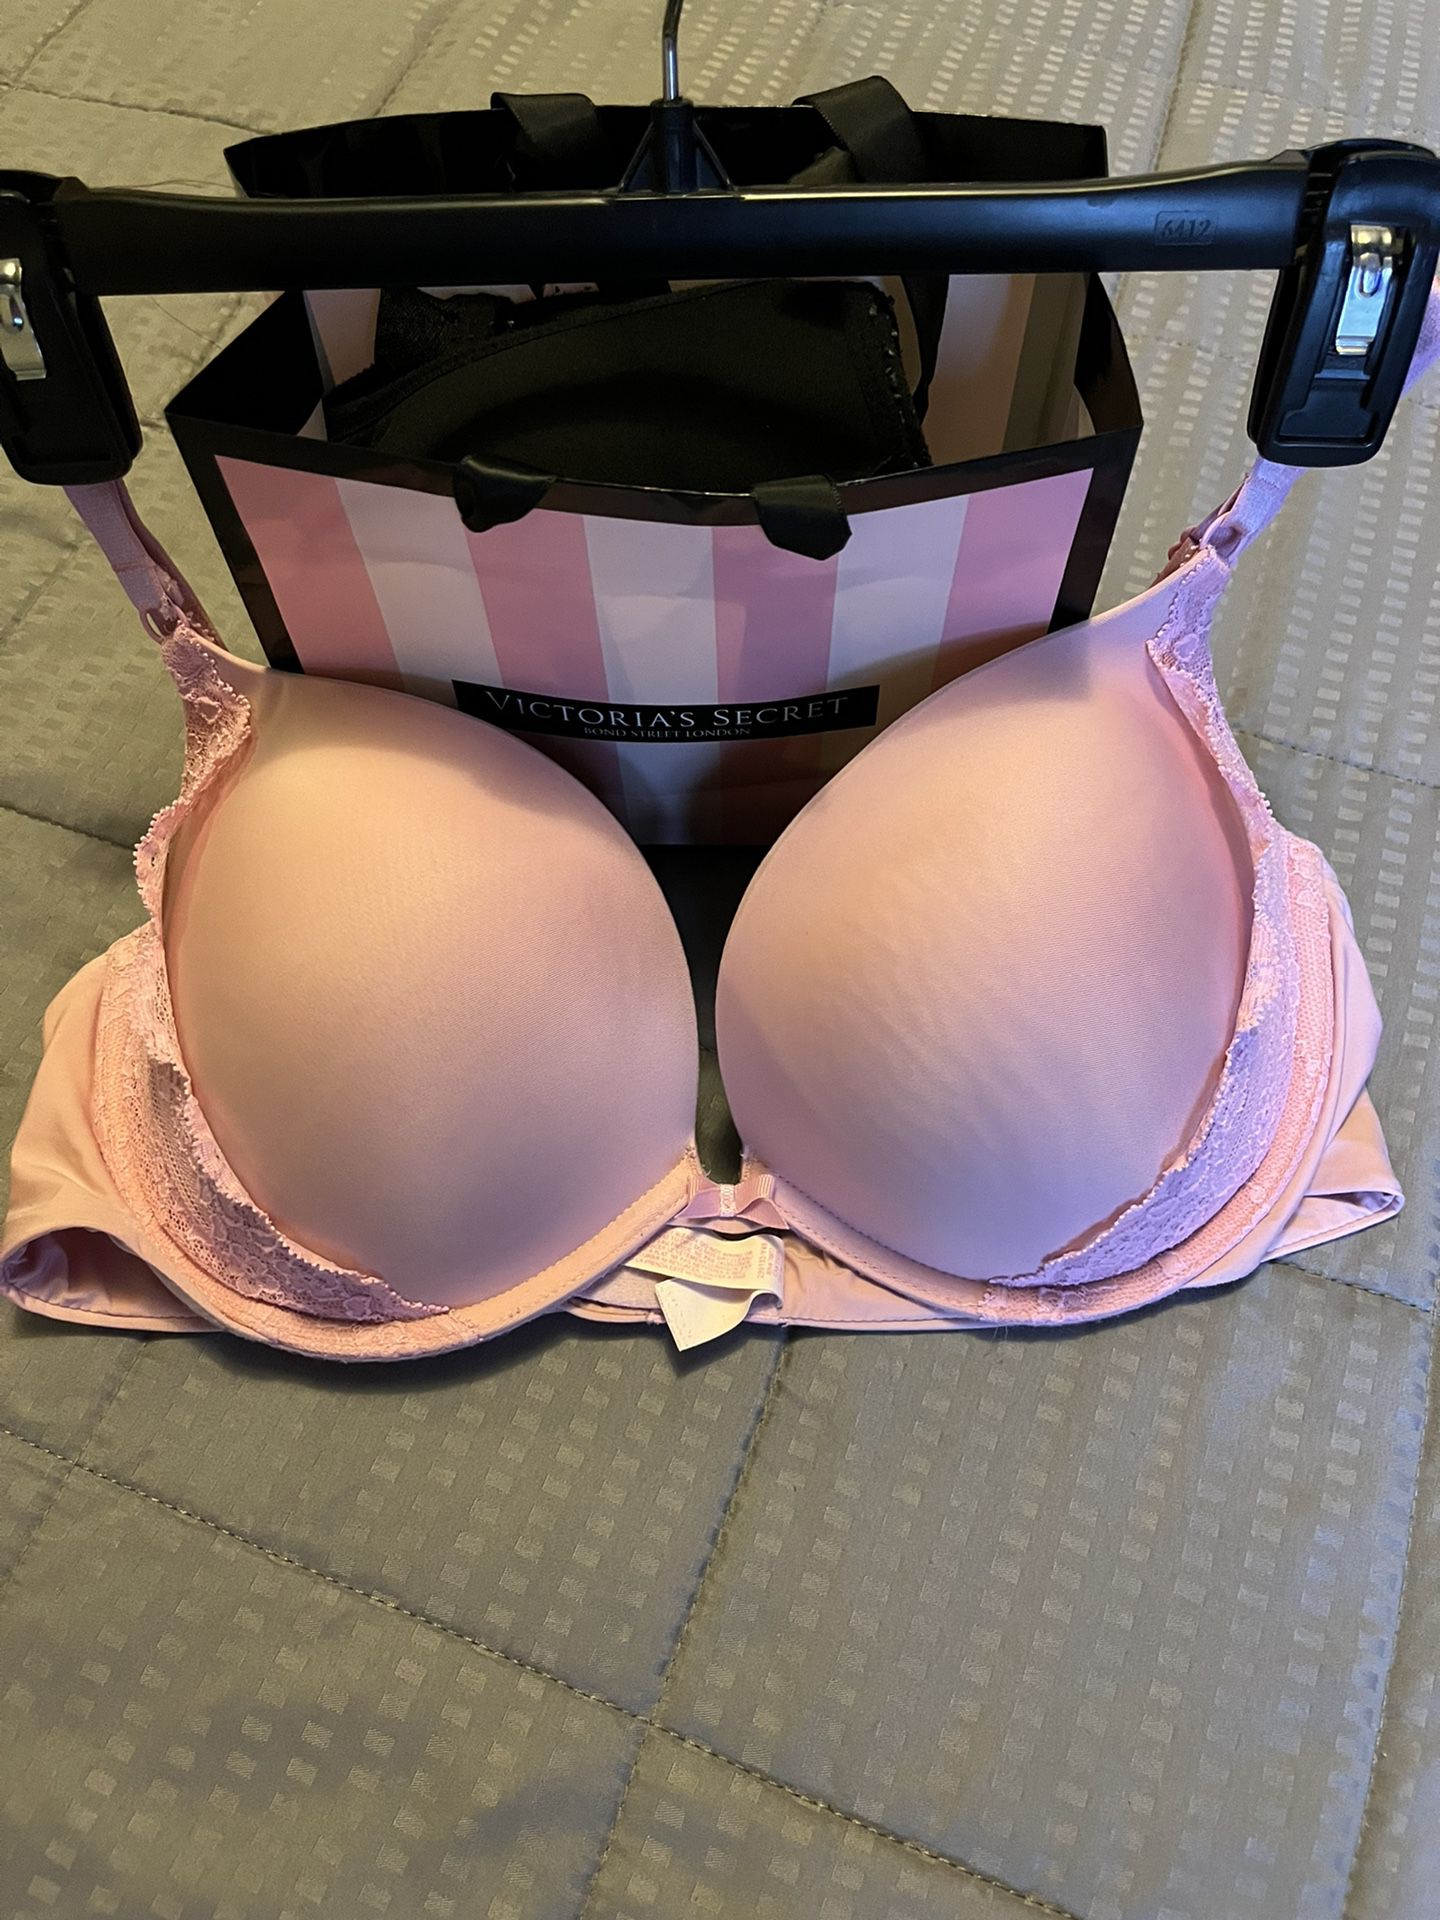 Victoria's Secret Pink Padded Push Up Bra for Sale in Green Bay